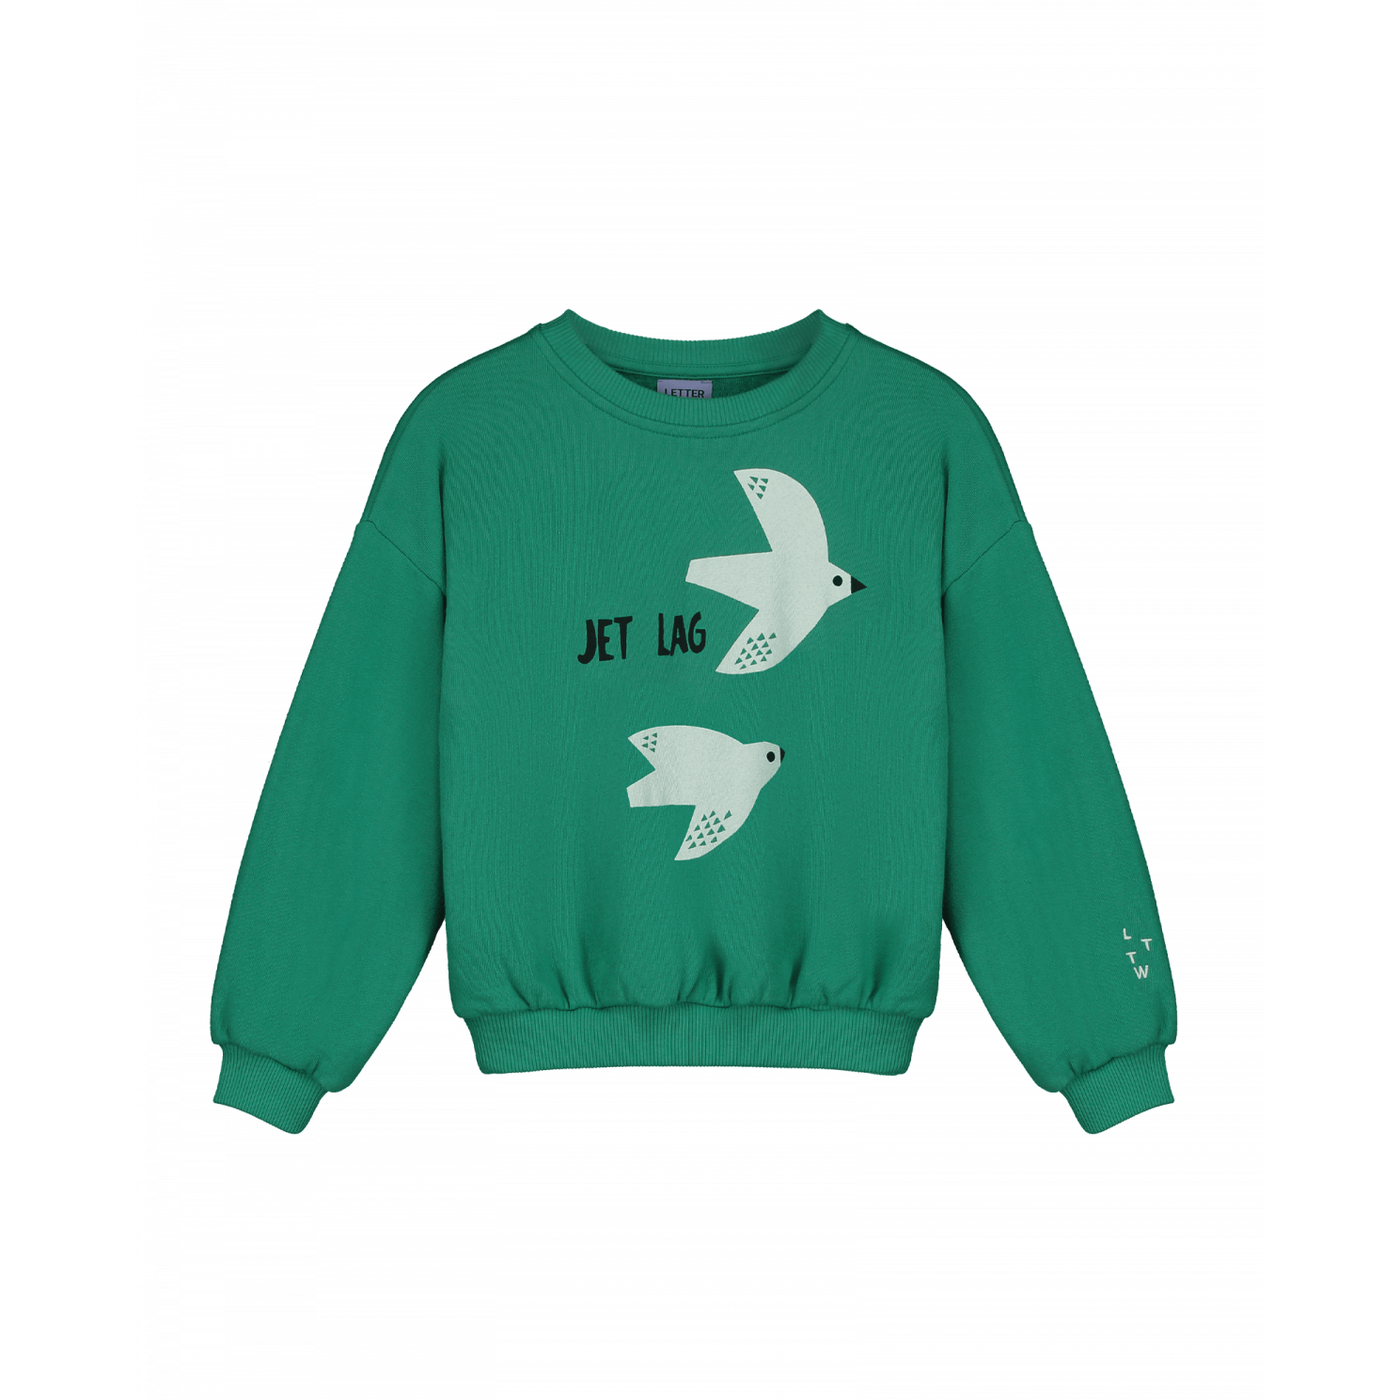 LETTER TO THE WORLD - Kyoto Grass Sweater - Le CirQue Kidsconceptstore 